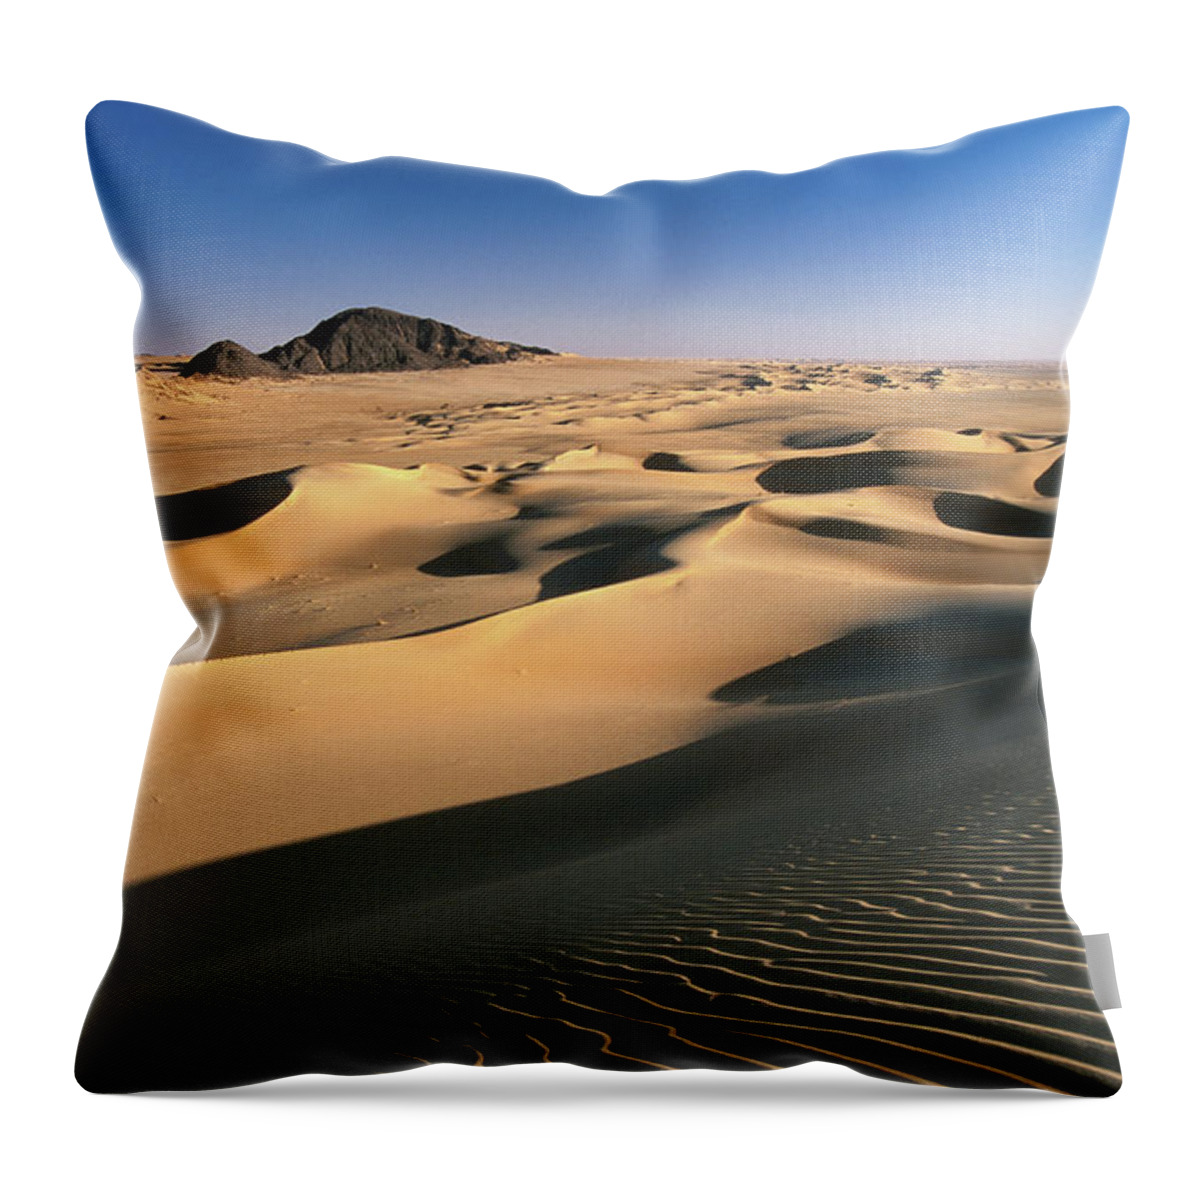 Sand Dune Throw Pillow featuring the photograph Sand Dunes Of Ilekane In Tenere Part Of by Frans Lemmens